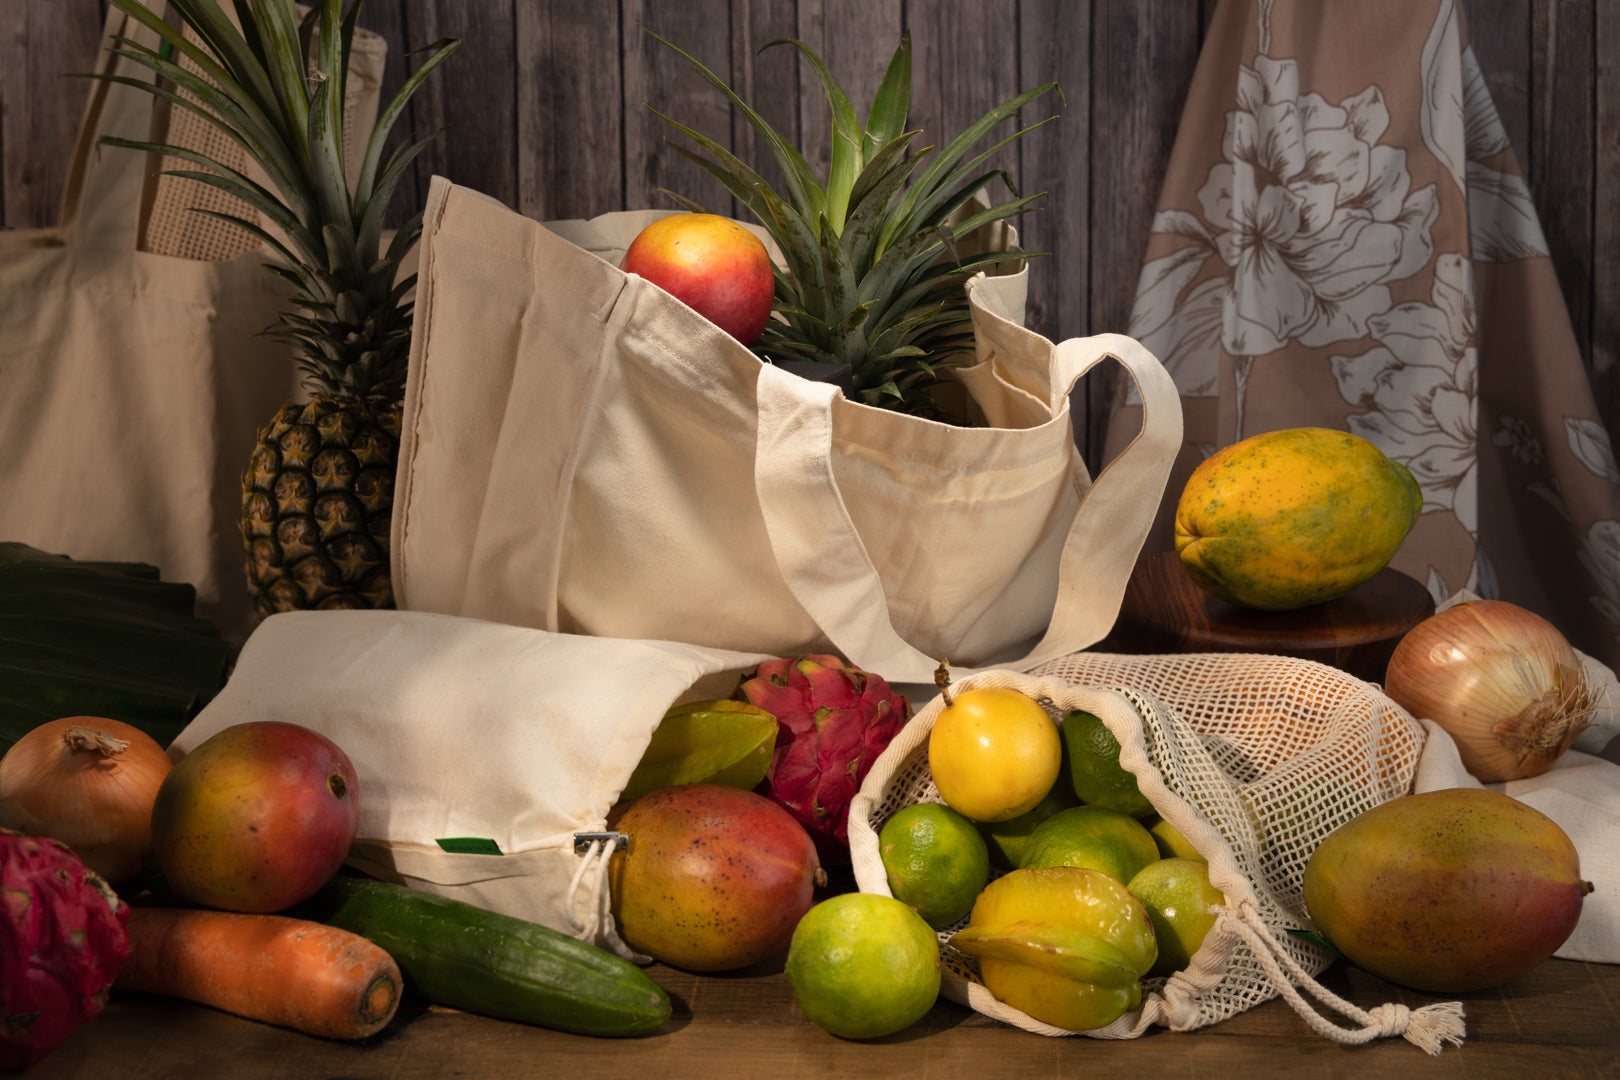 This image shows the Desesh reusable unbranded cotton grocery tote bag for a more sustainable eco friendly plastic free daily routine. In the image the bags are full of fruit and groceries